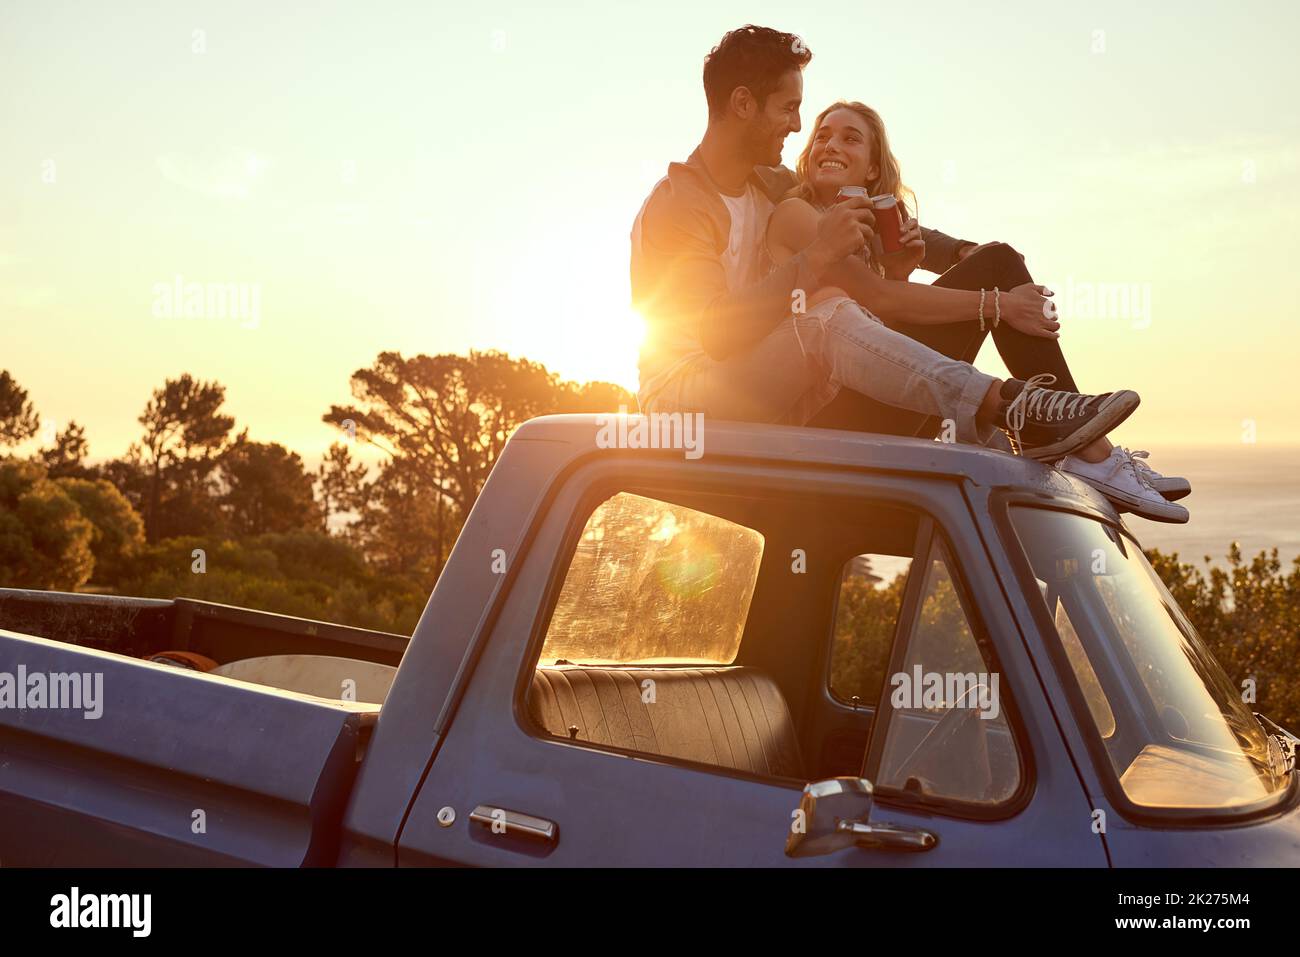 Hilltop romance at sunset. Shot of an affectionate young couple on a roadtrip. Stock Photo